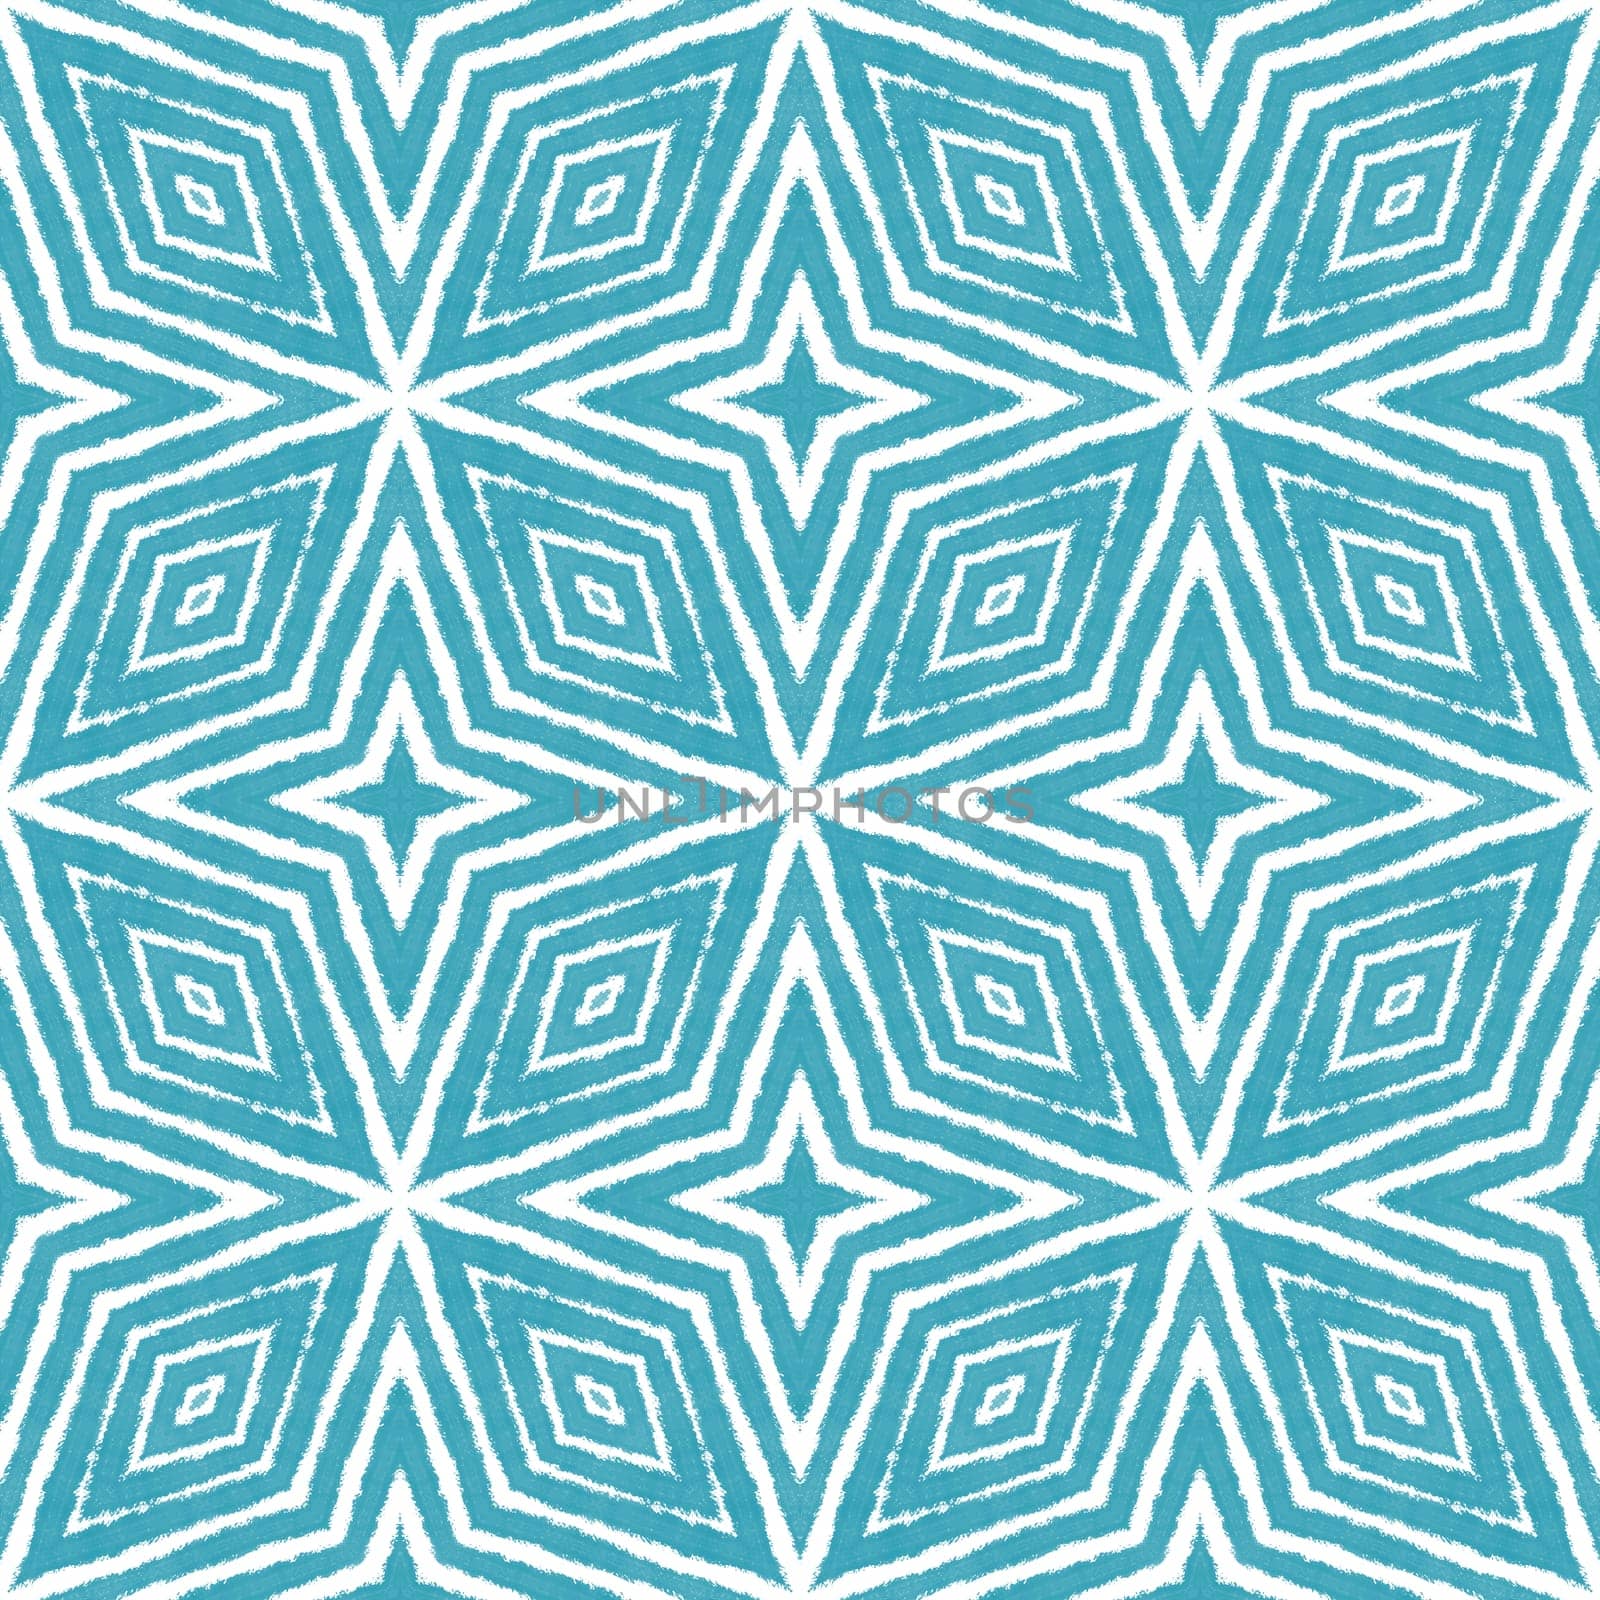 Ethnic hand painted pattern. Turquoise symmetrical kaleidoscope background. Textile ready eminent print, swimwear fabric, wallpaper, wrapping. Summer dress ethnic hand painted tile.